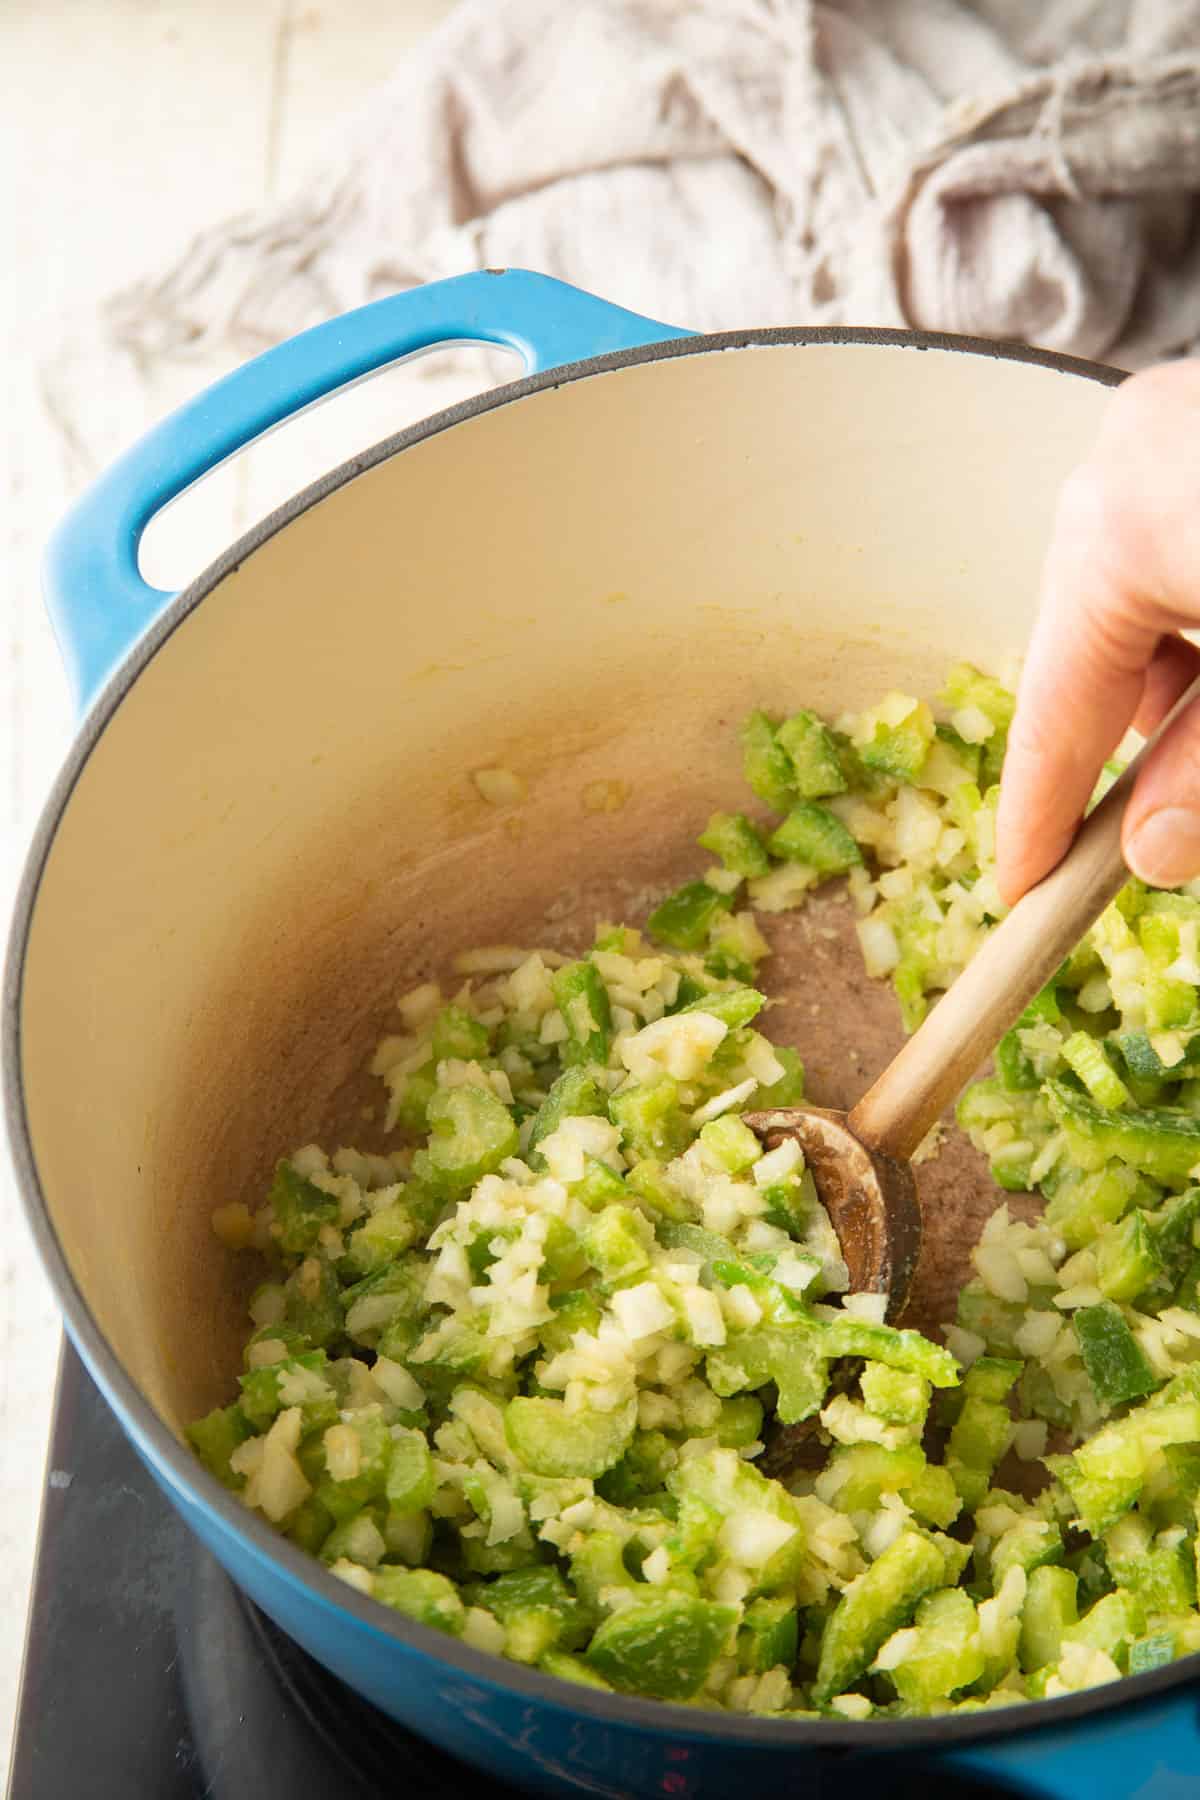 Hand stirring onions, peppers and celery in a cooking pot.